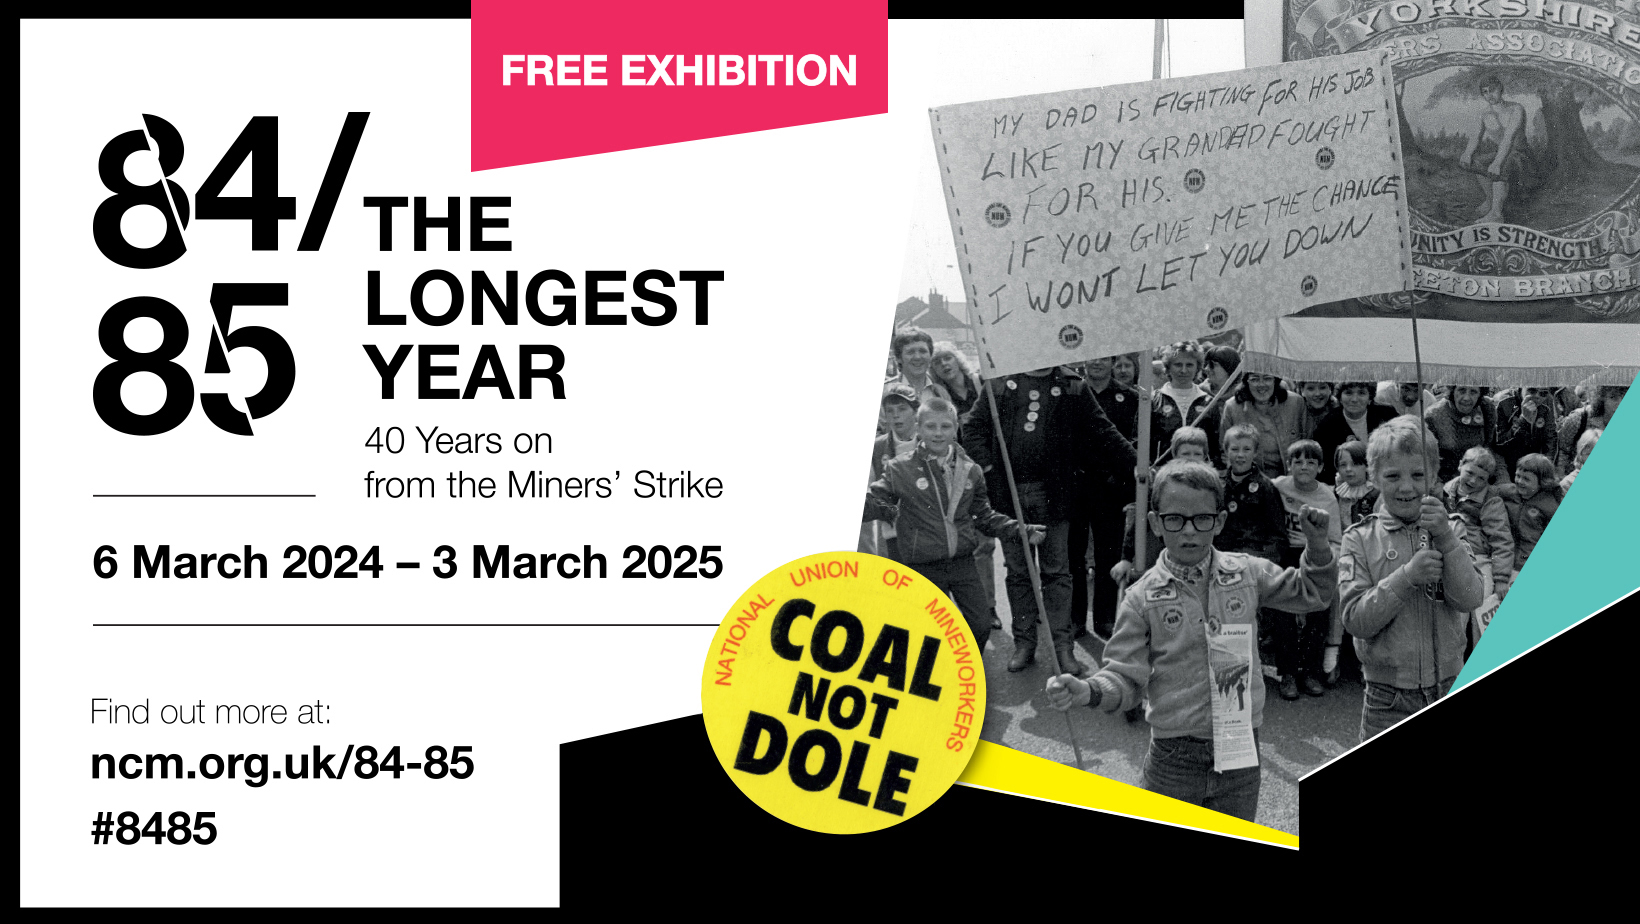 The Longest Year, Miners Strike Exhibition, National Coal Mining Museum